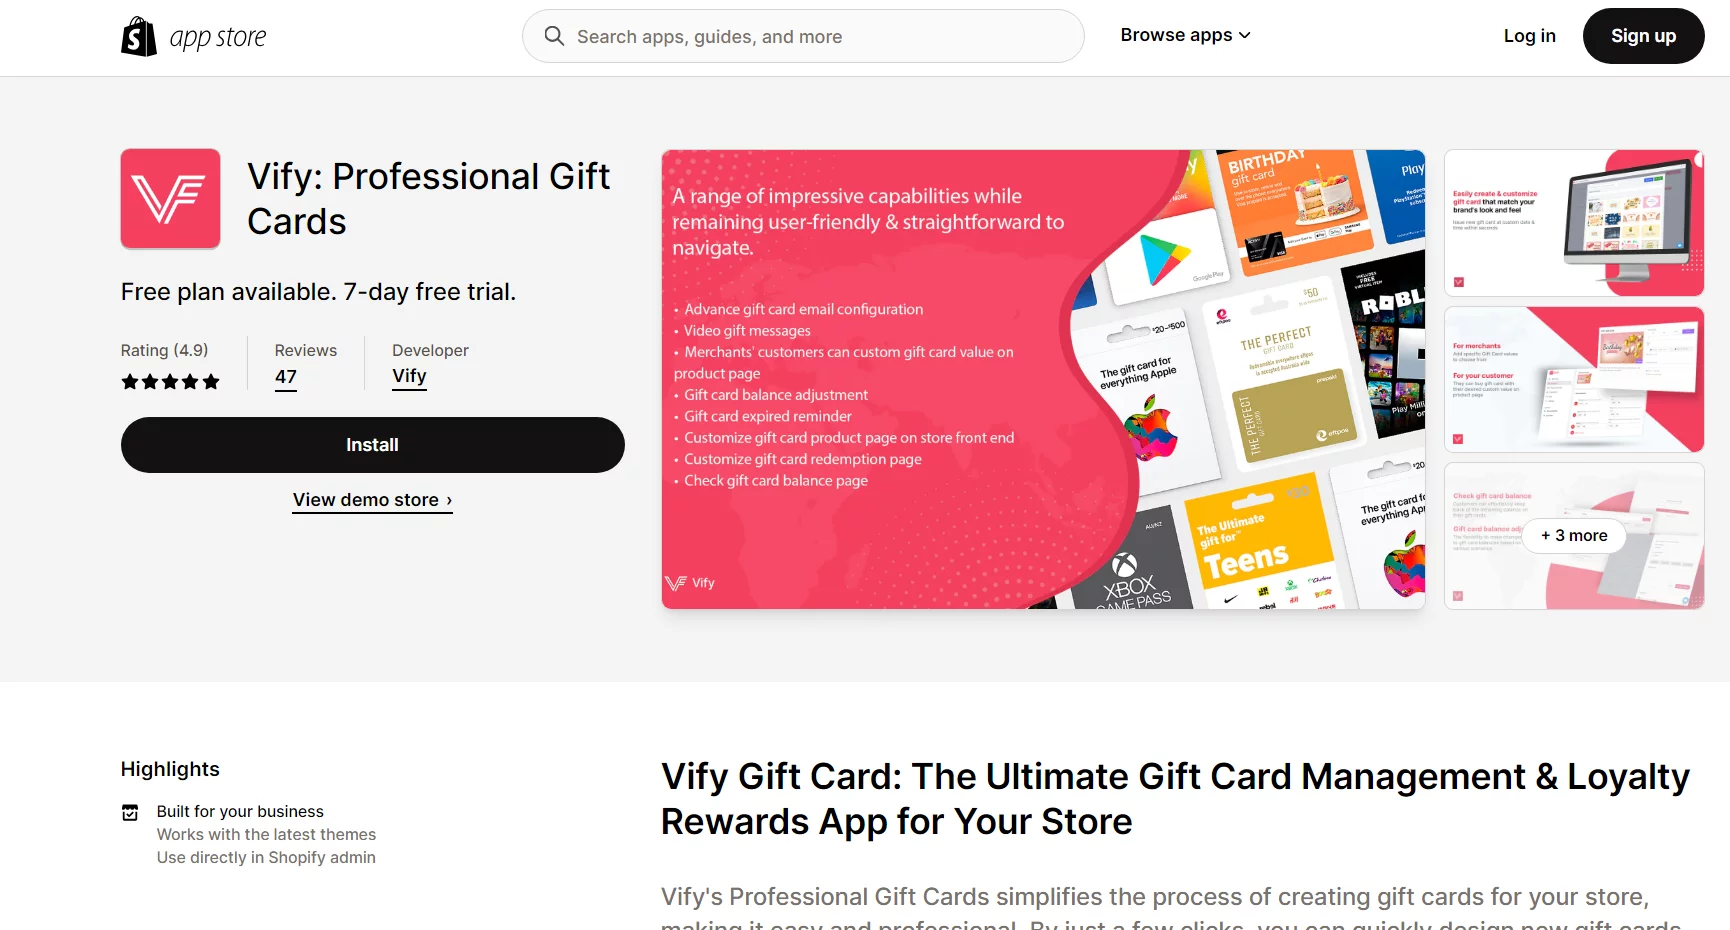 Vify's Professional Gift Cards